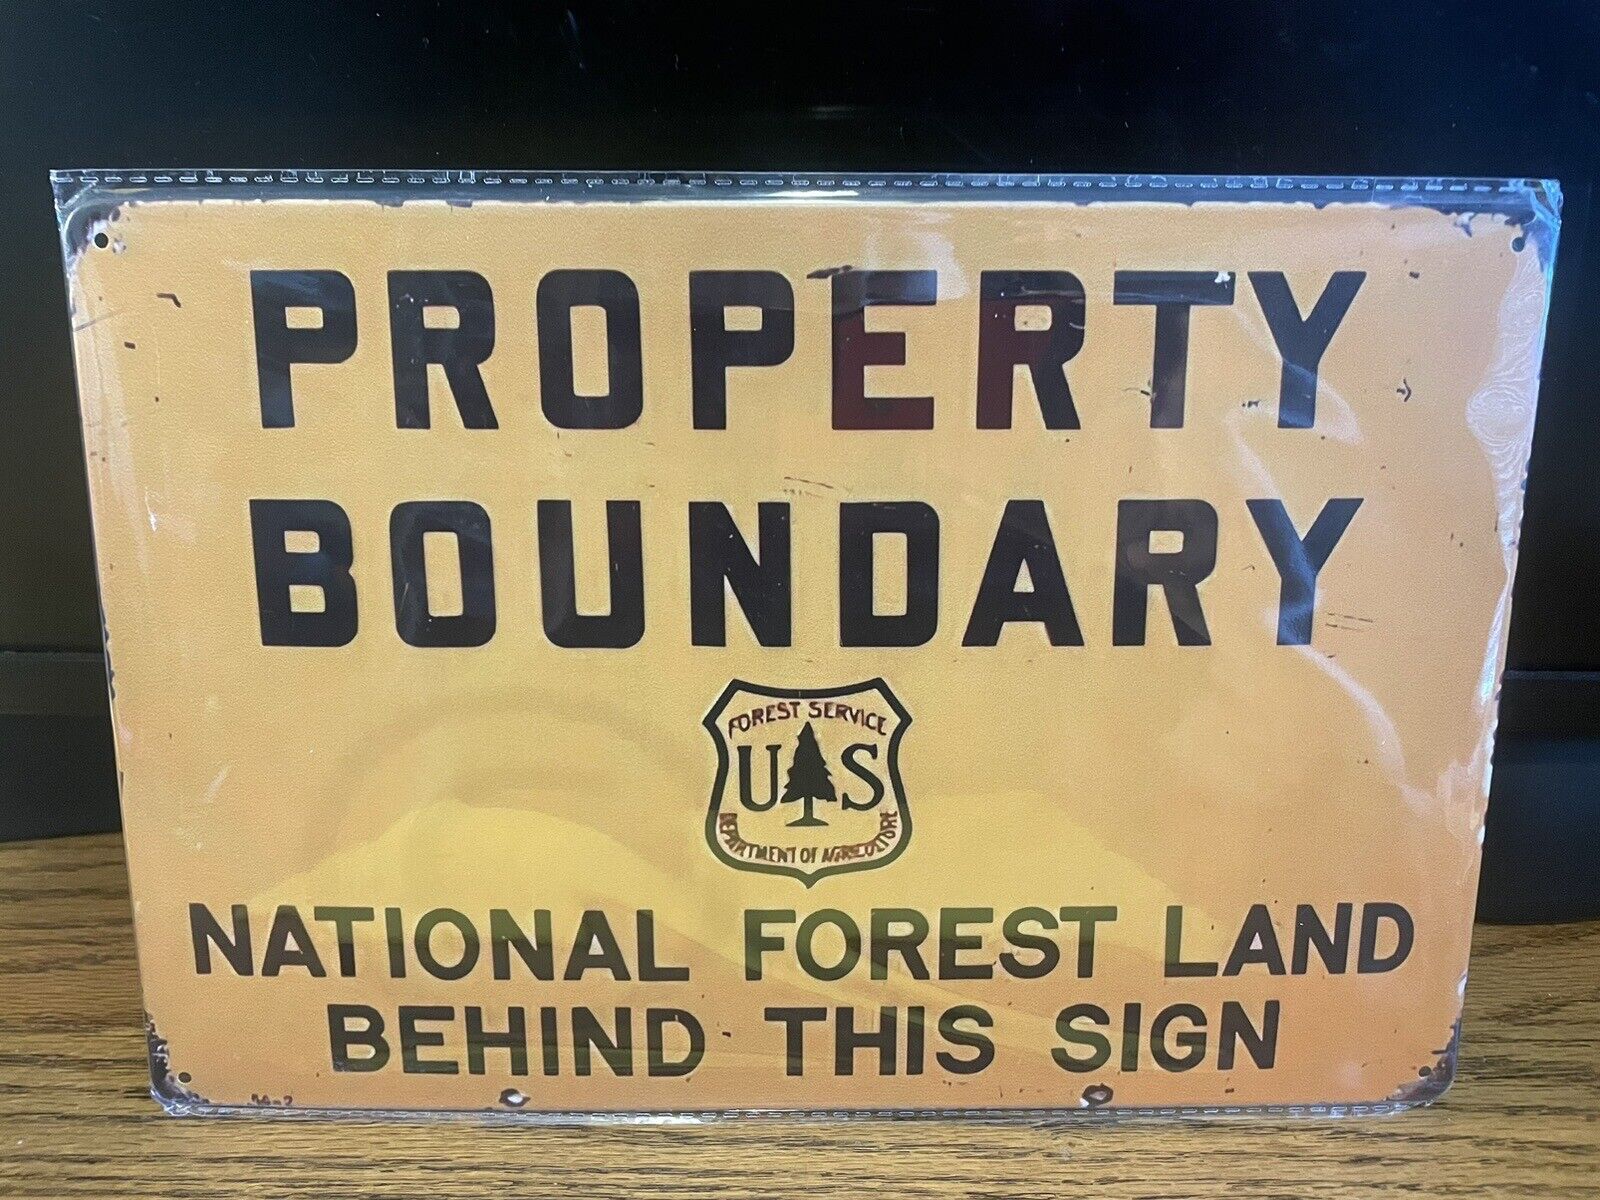 U. S. FOREST SERVICE PROPERTY BOUNDARY 8”x12” METAL SIGN NIP NATIONAL FOREST